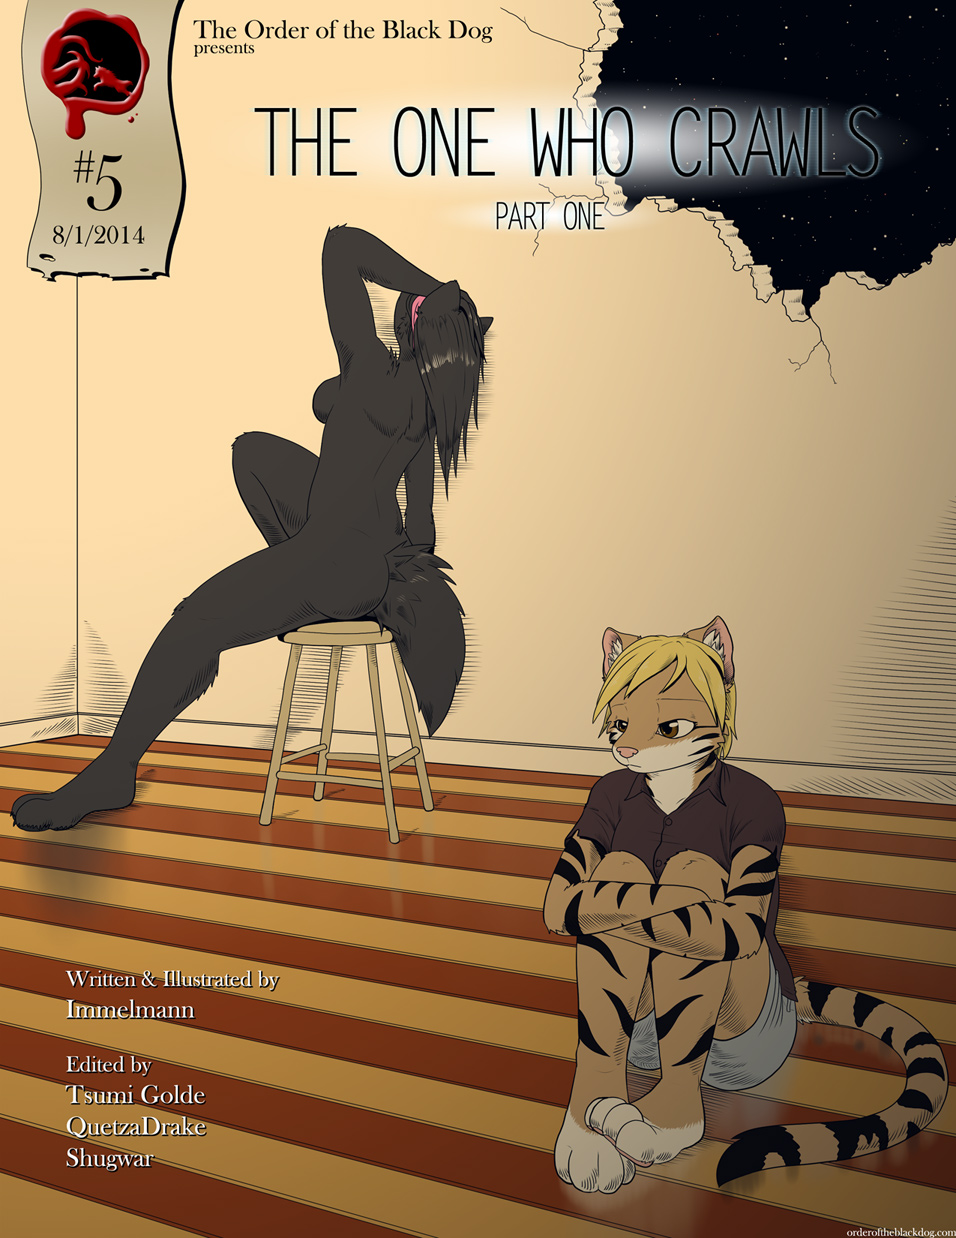 Issue 5, Cover